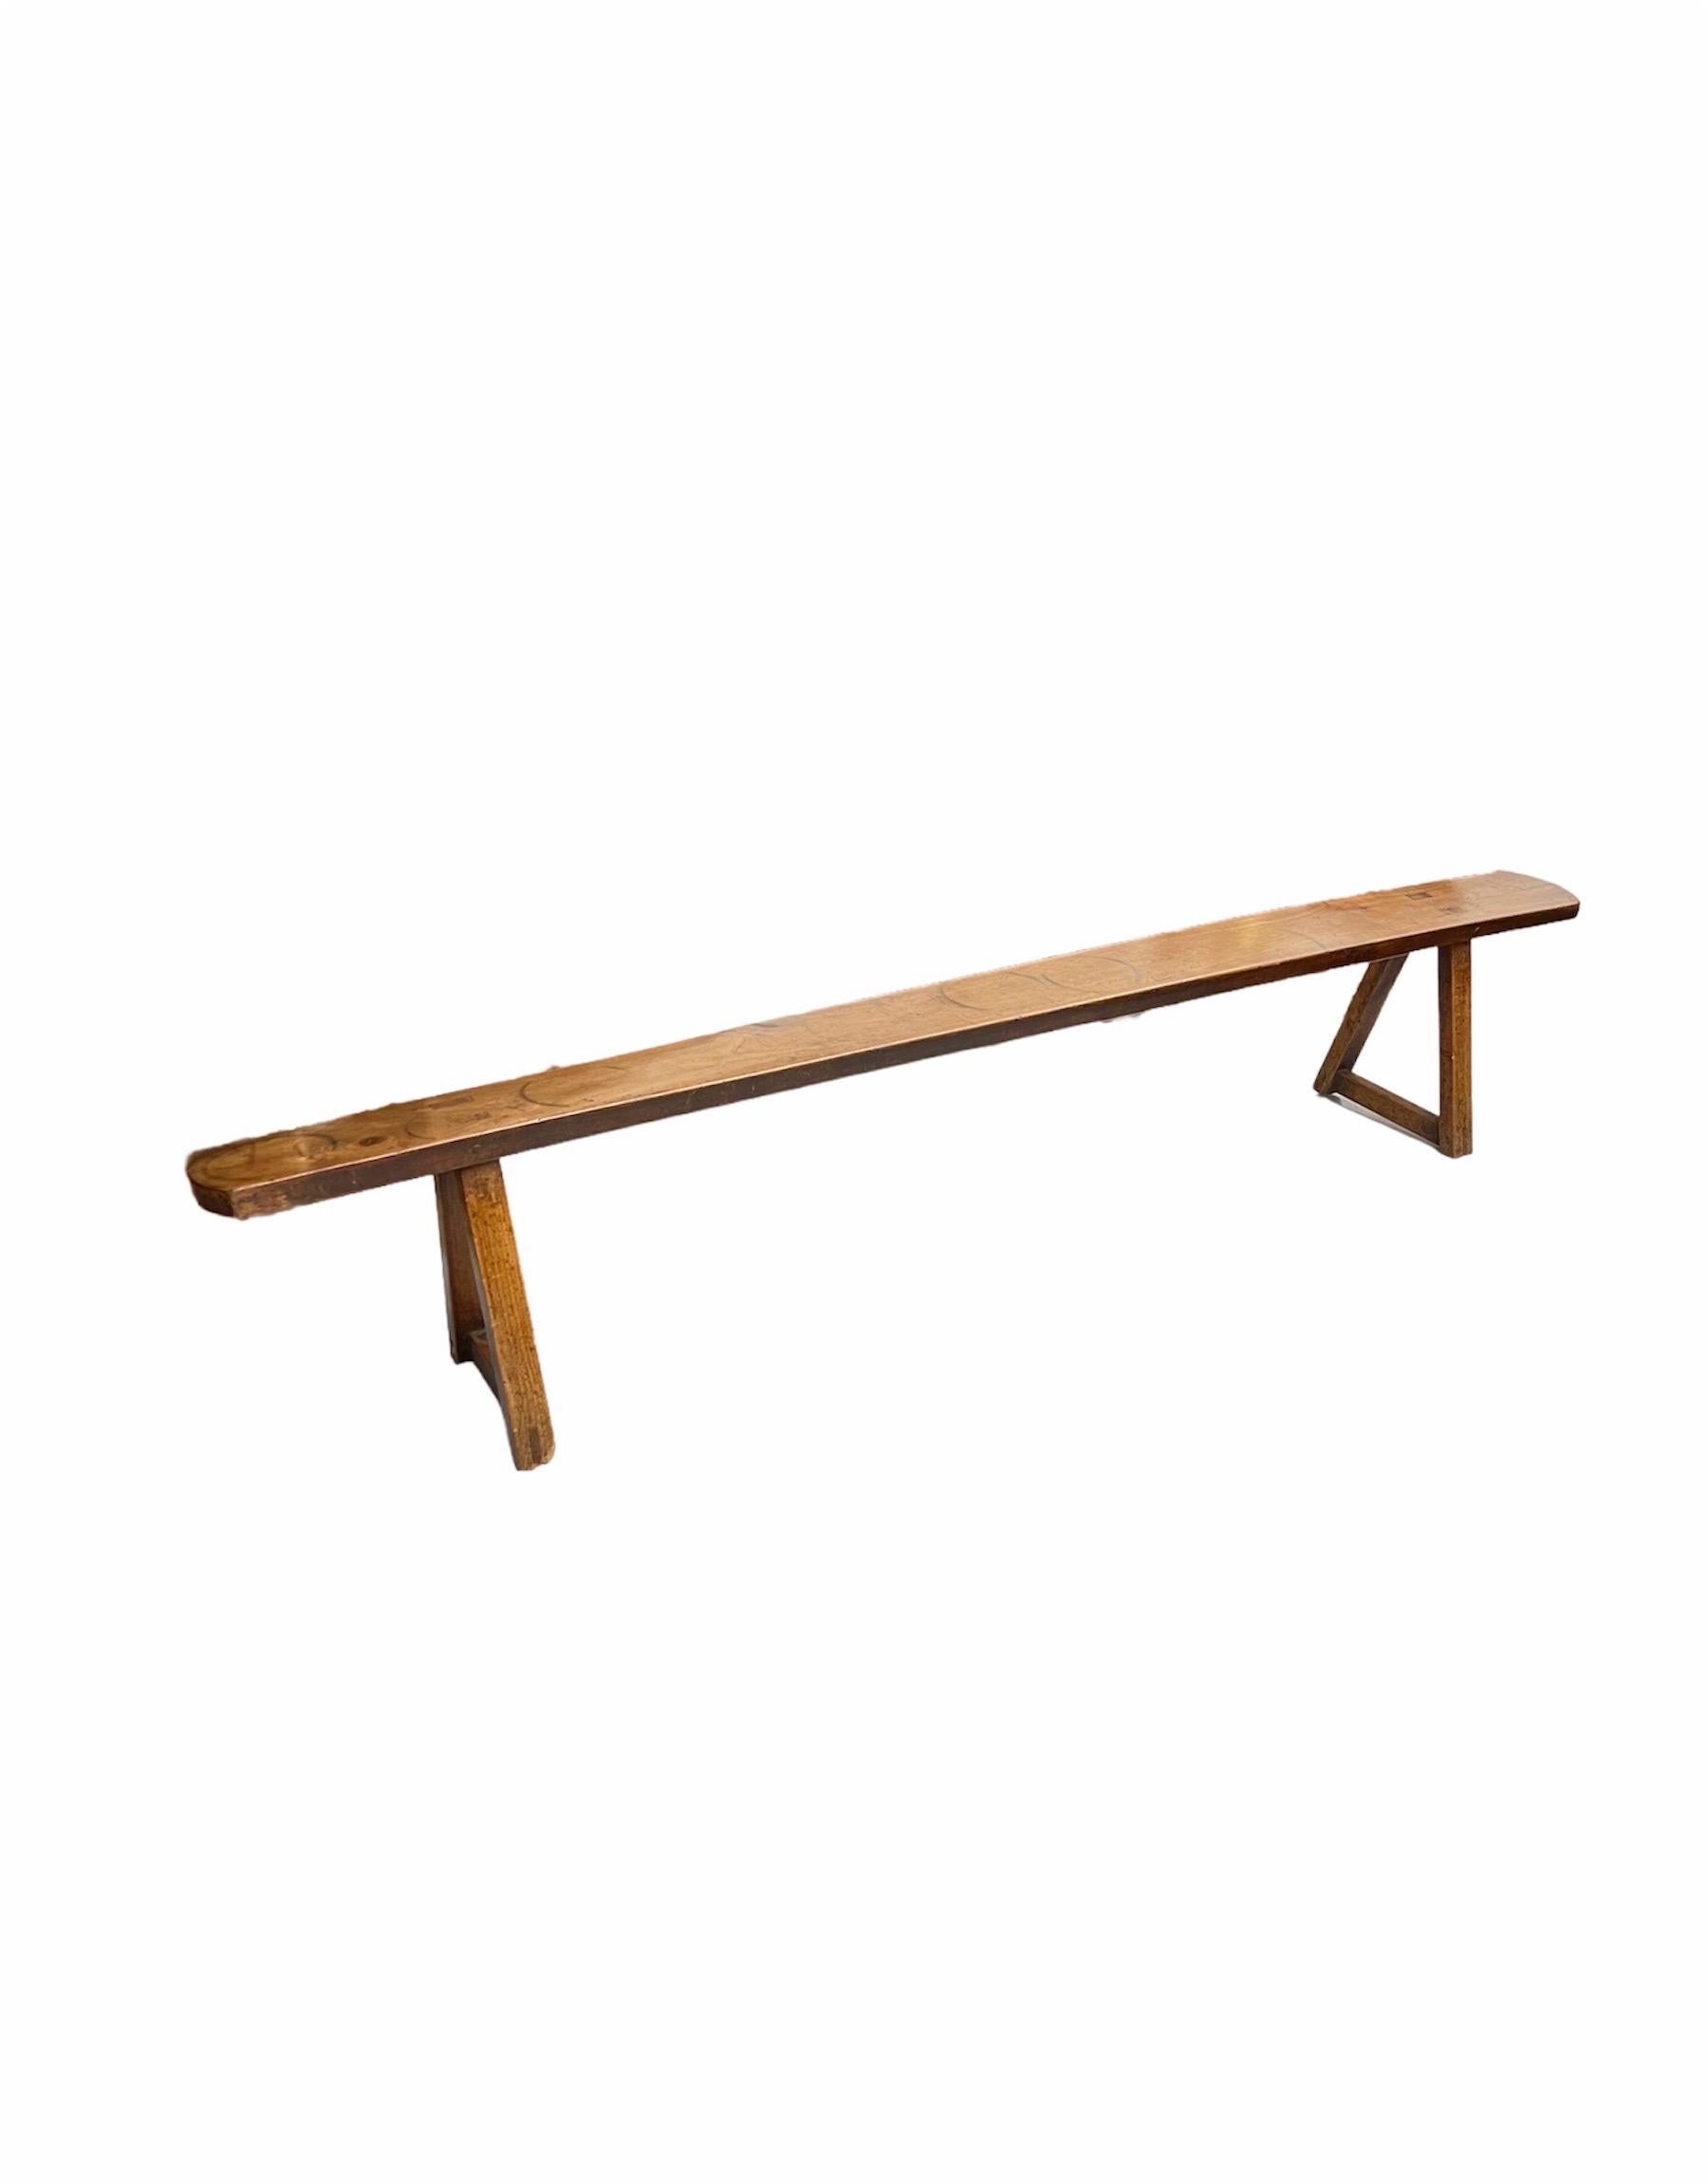 low wooden bench for plants